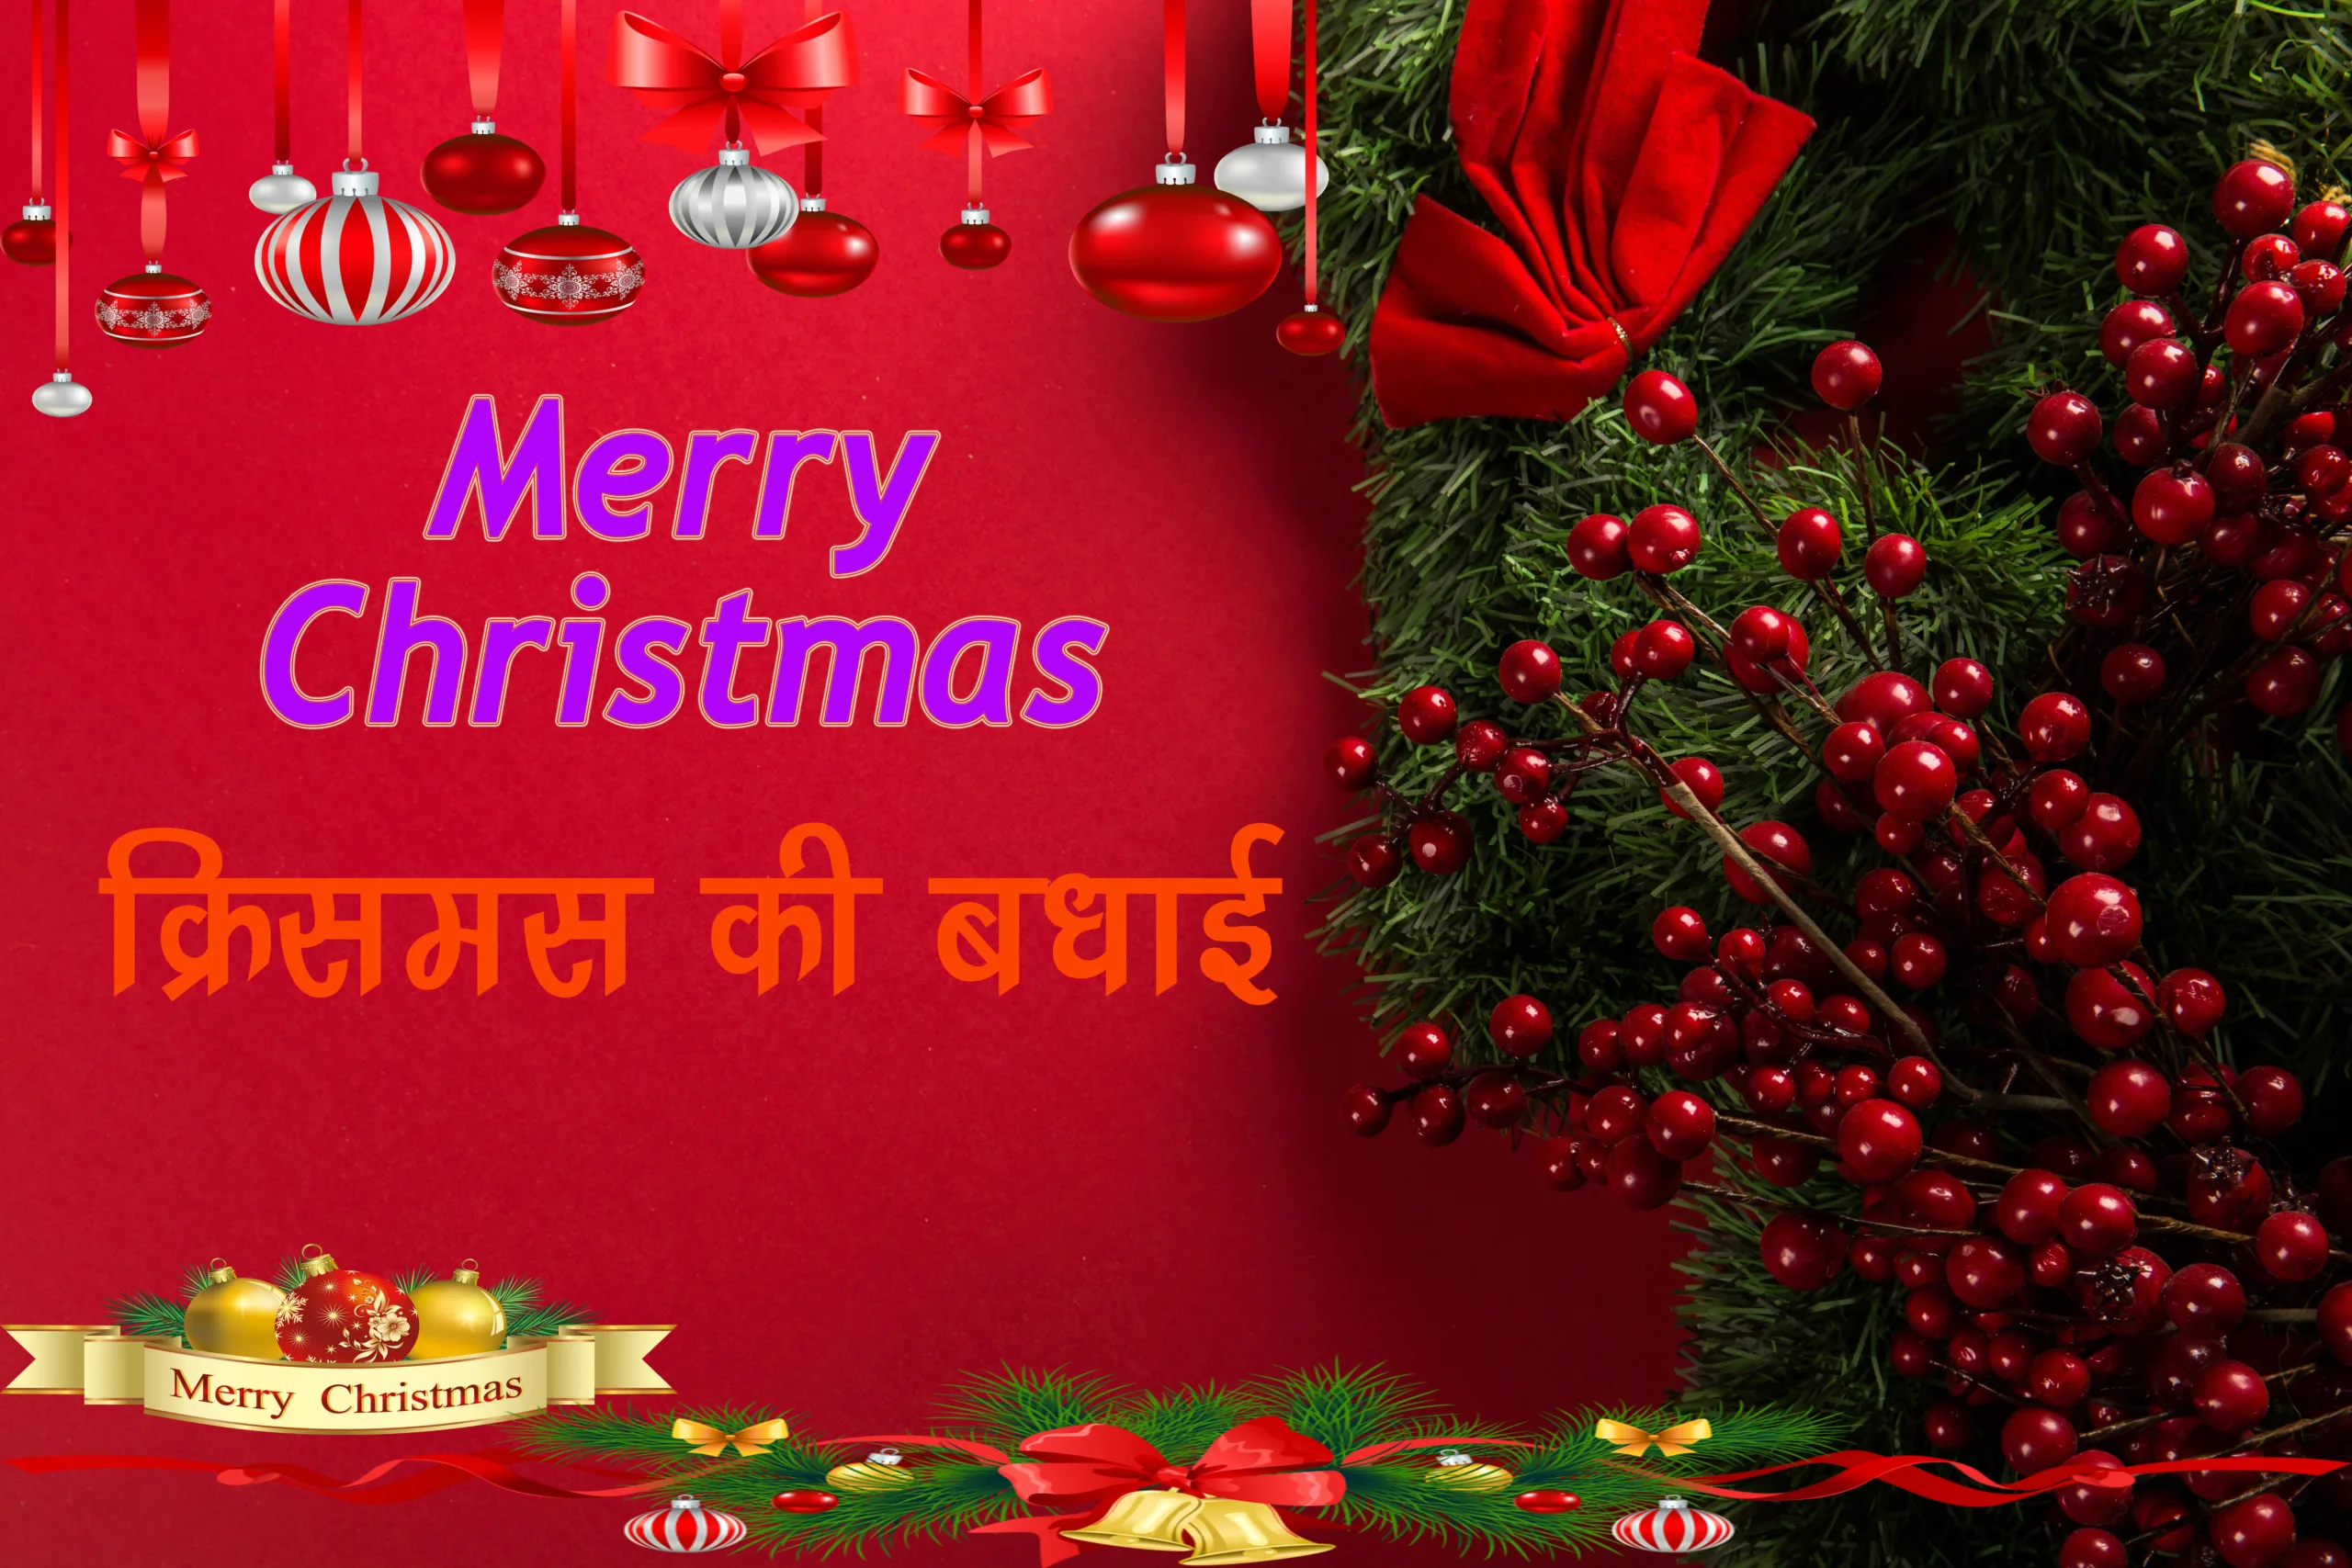 merry-christmas-wishes-messages